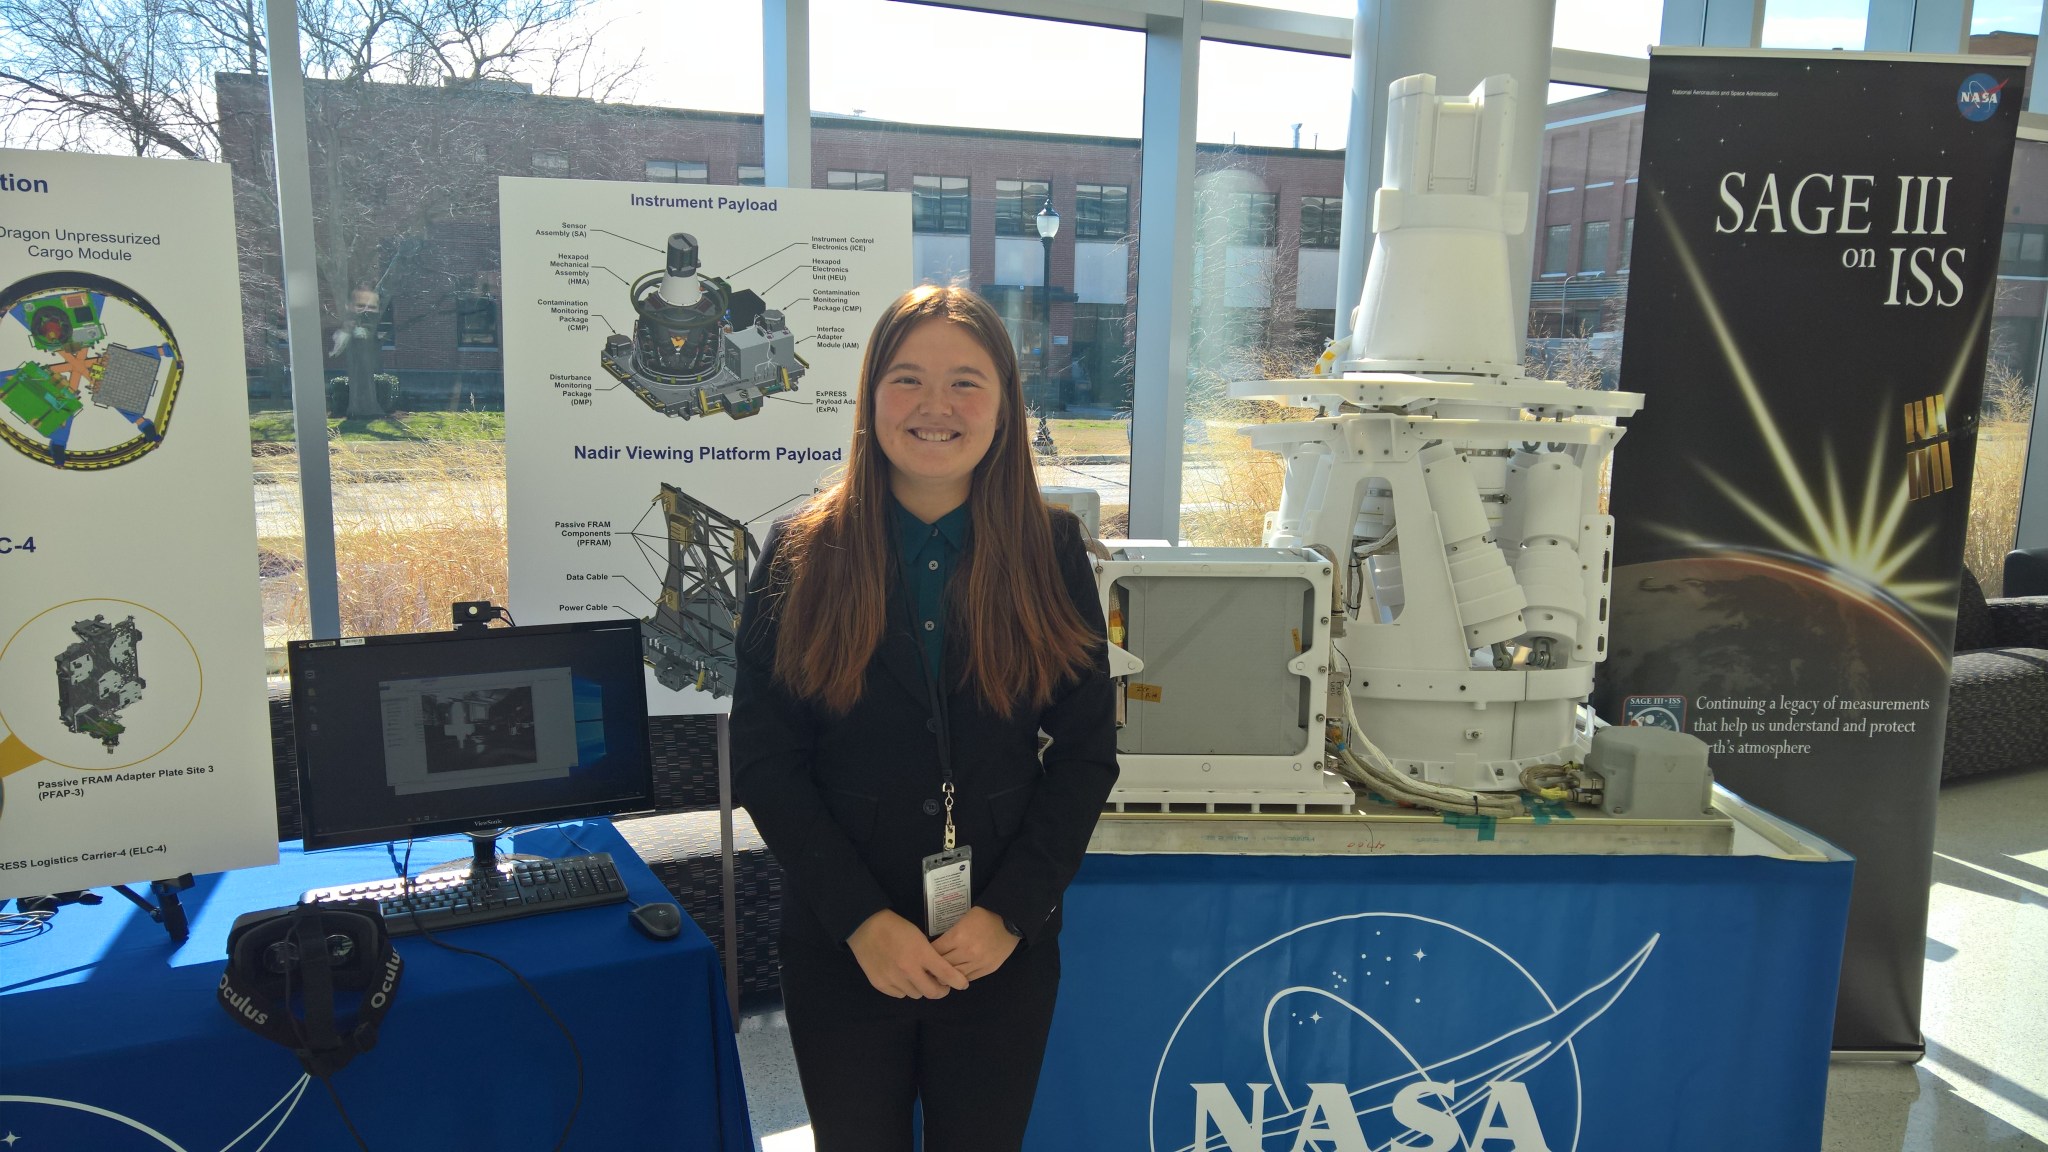 Christine Odenwald poses with a SAGE III on ISS display at NASA Langley.